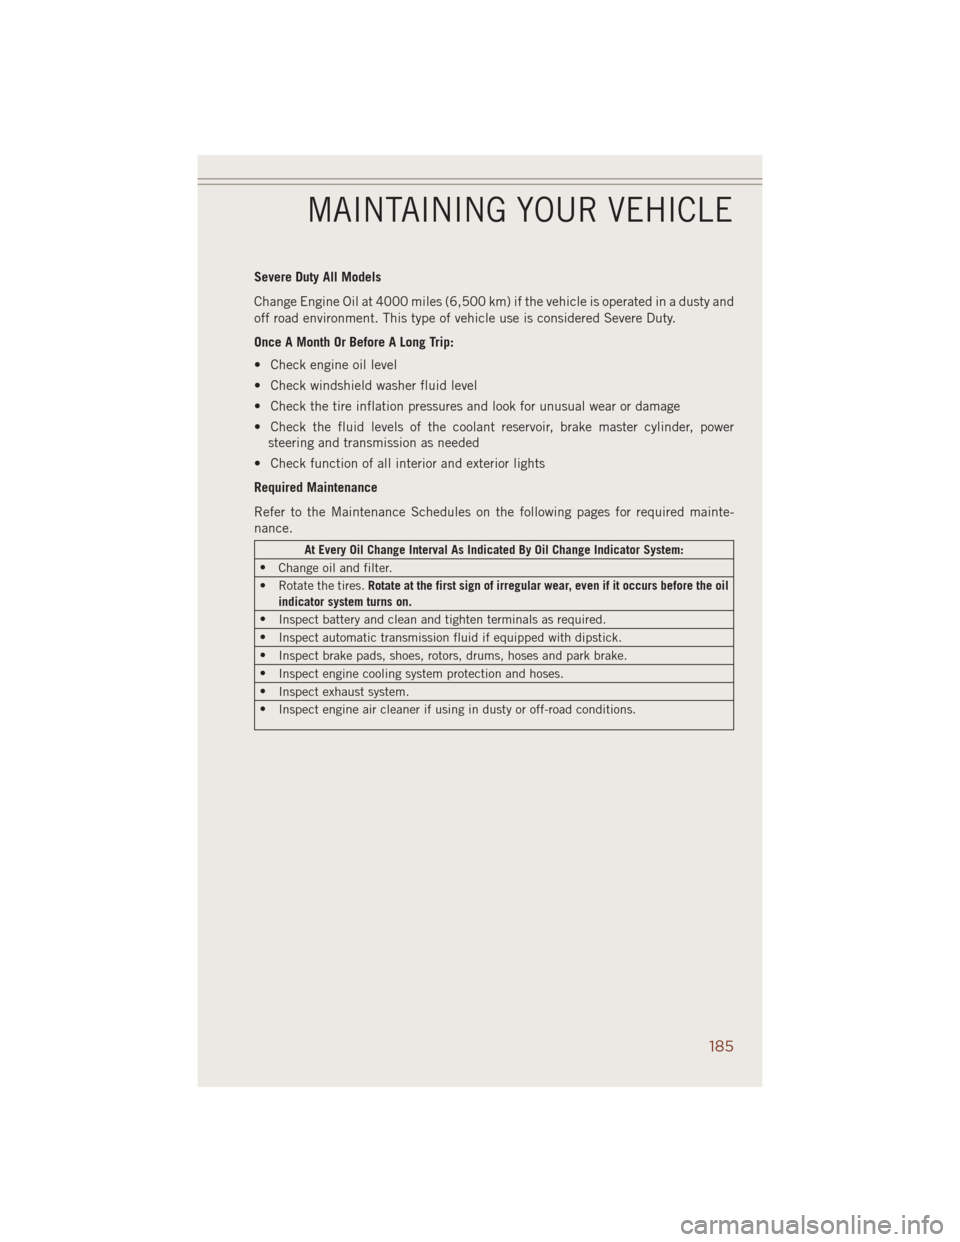 JEEP GRAND CHEROKEE 2014 WK2 / 4.G User Guide Severe Duty All Models
Change Engine Oil at 4000 miles (6,500 km) if the vehicle is operated in a dusty and
off road environment. This type of vehicle use is considered Severe Duty.
Once A Month Or Be